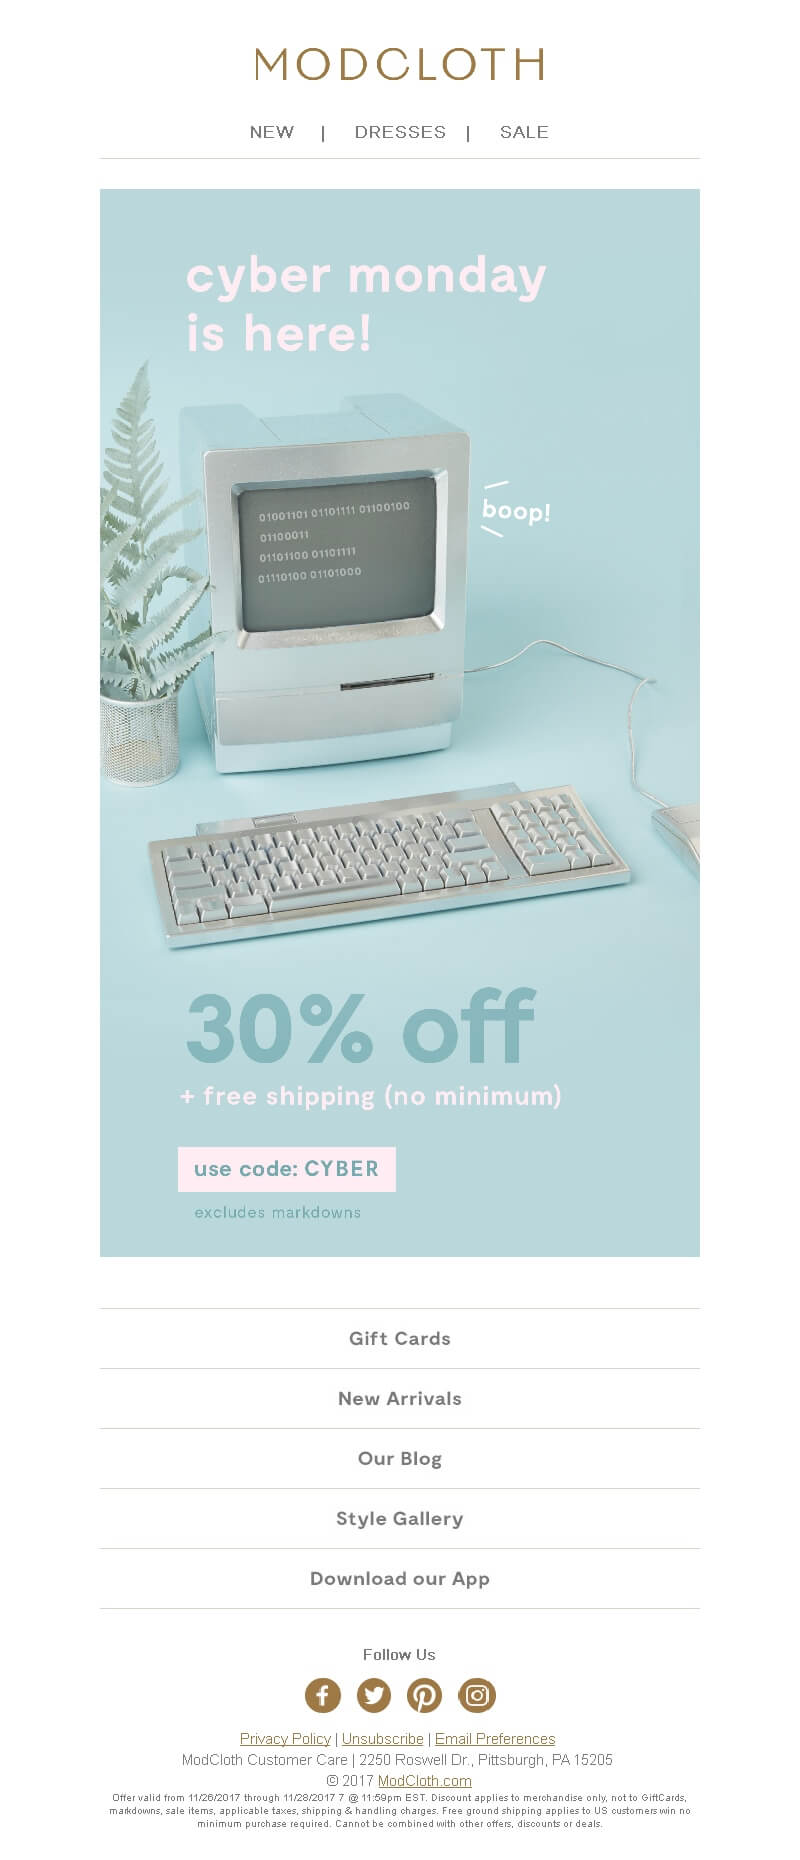 A Cyber Monday campaign with a retro computer displaying binary code and a word boop! near it.